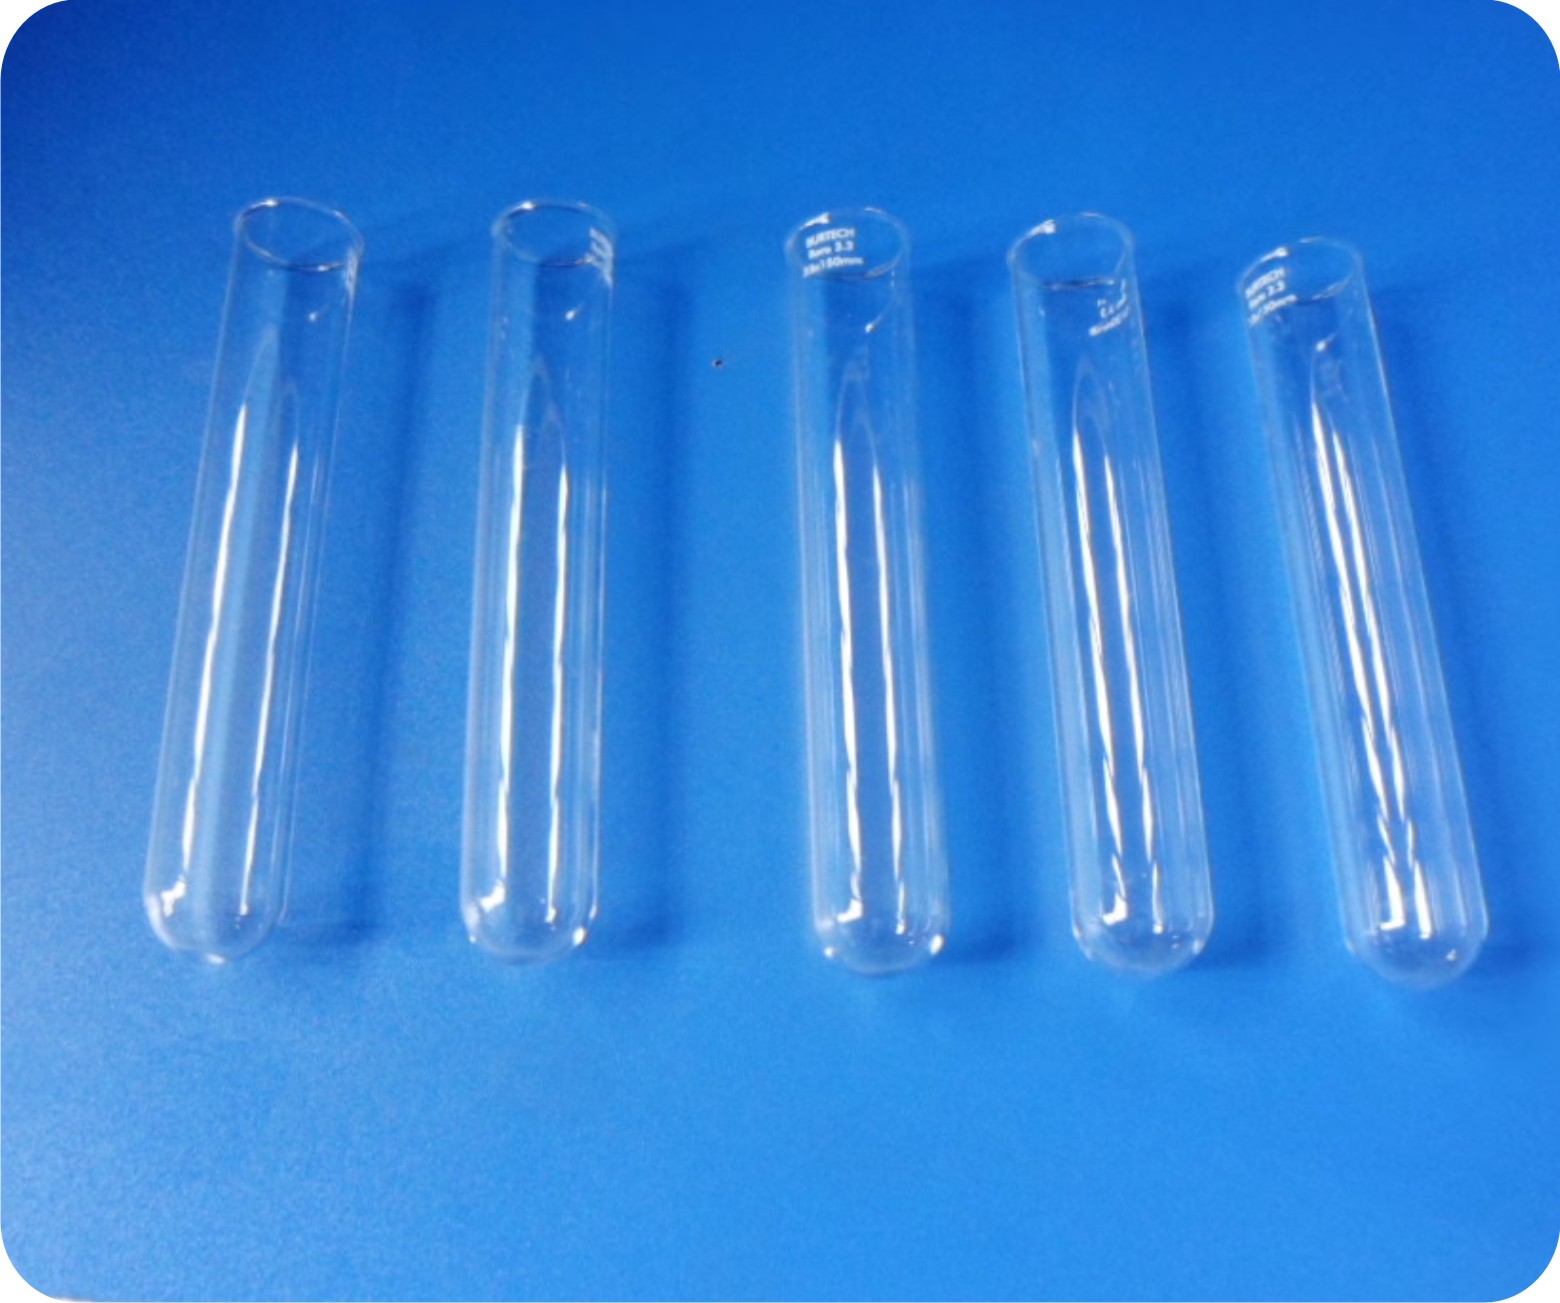 Quality Boiling tubes for boiling lab liquids strongly.